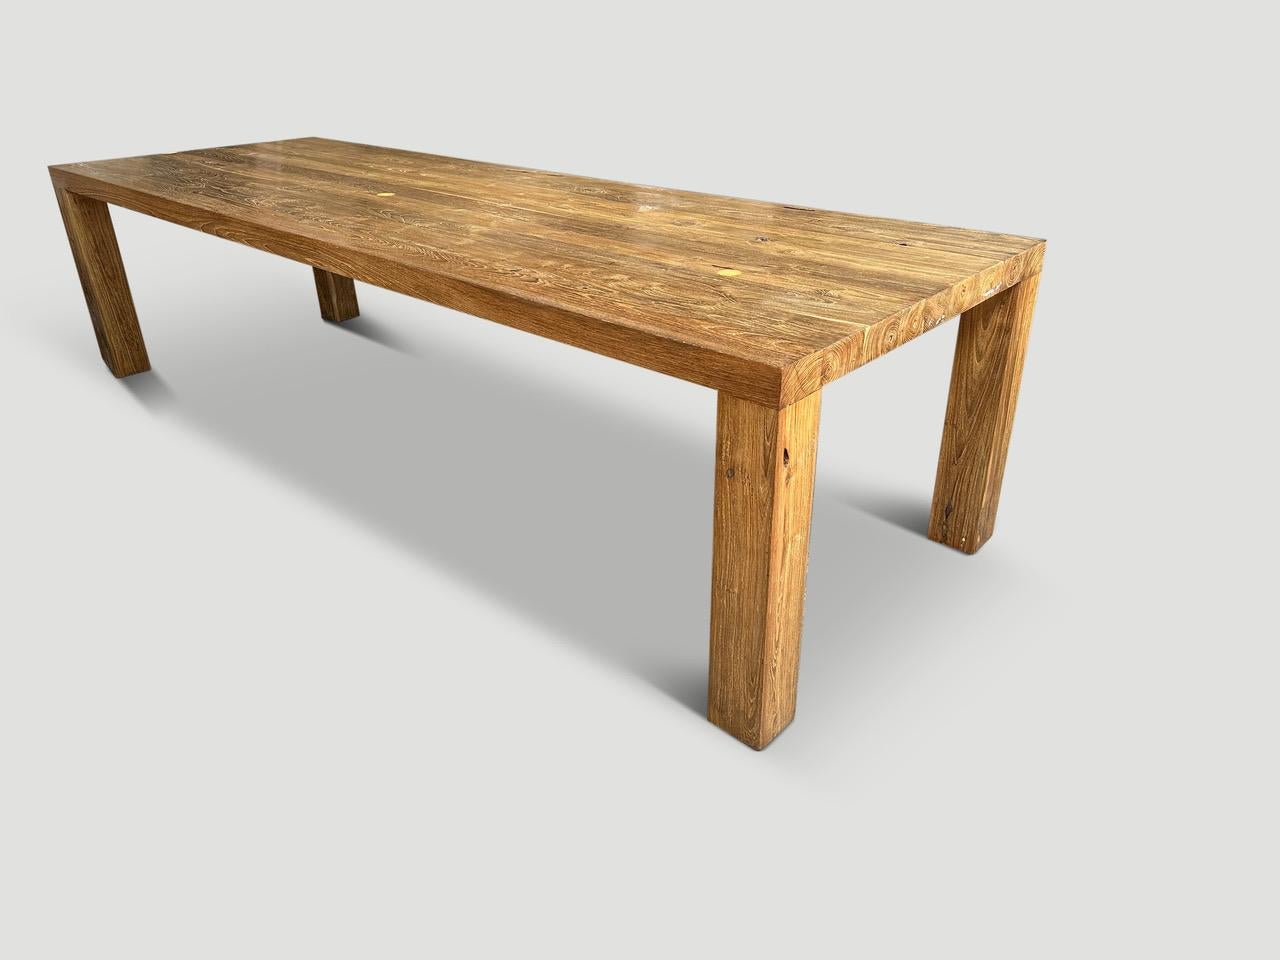 Impressive solid reclaimed teak wood dining table with 5” x 5” modern square legs and a 2.5” top. Finished with a natural oil revealing the beautiful wood grain.

Own an Andrianna Shamaris original.

Andrianna Shamaris. The Leader In Modern Organic